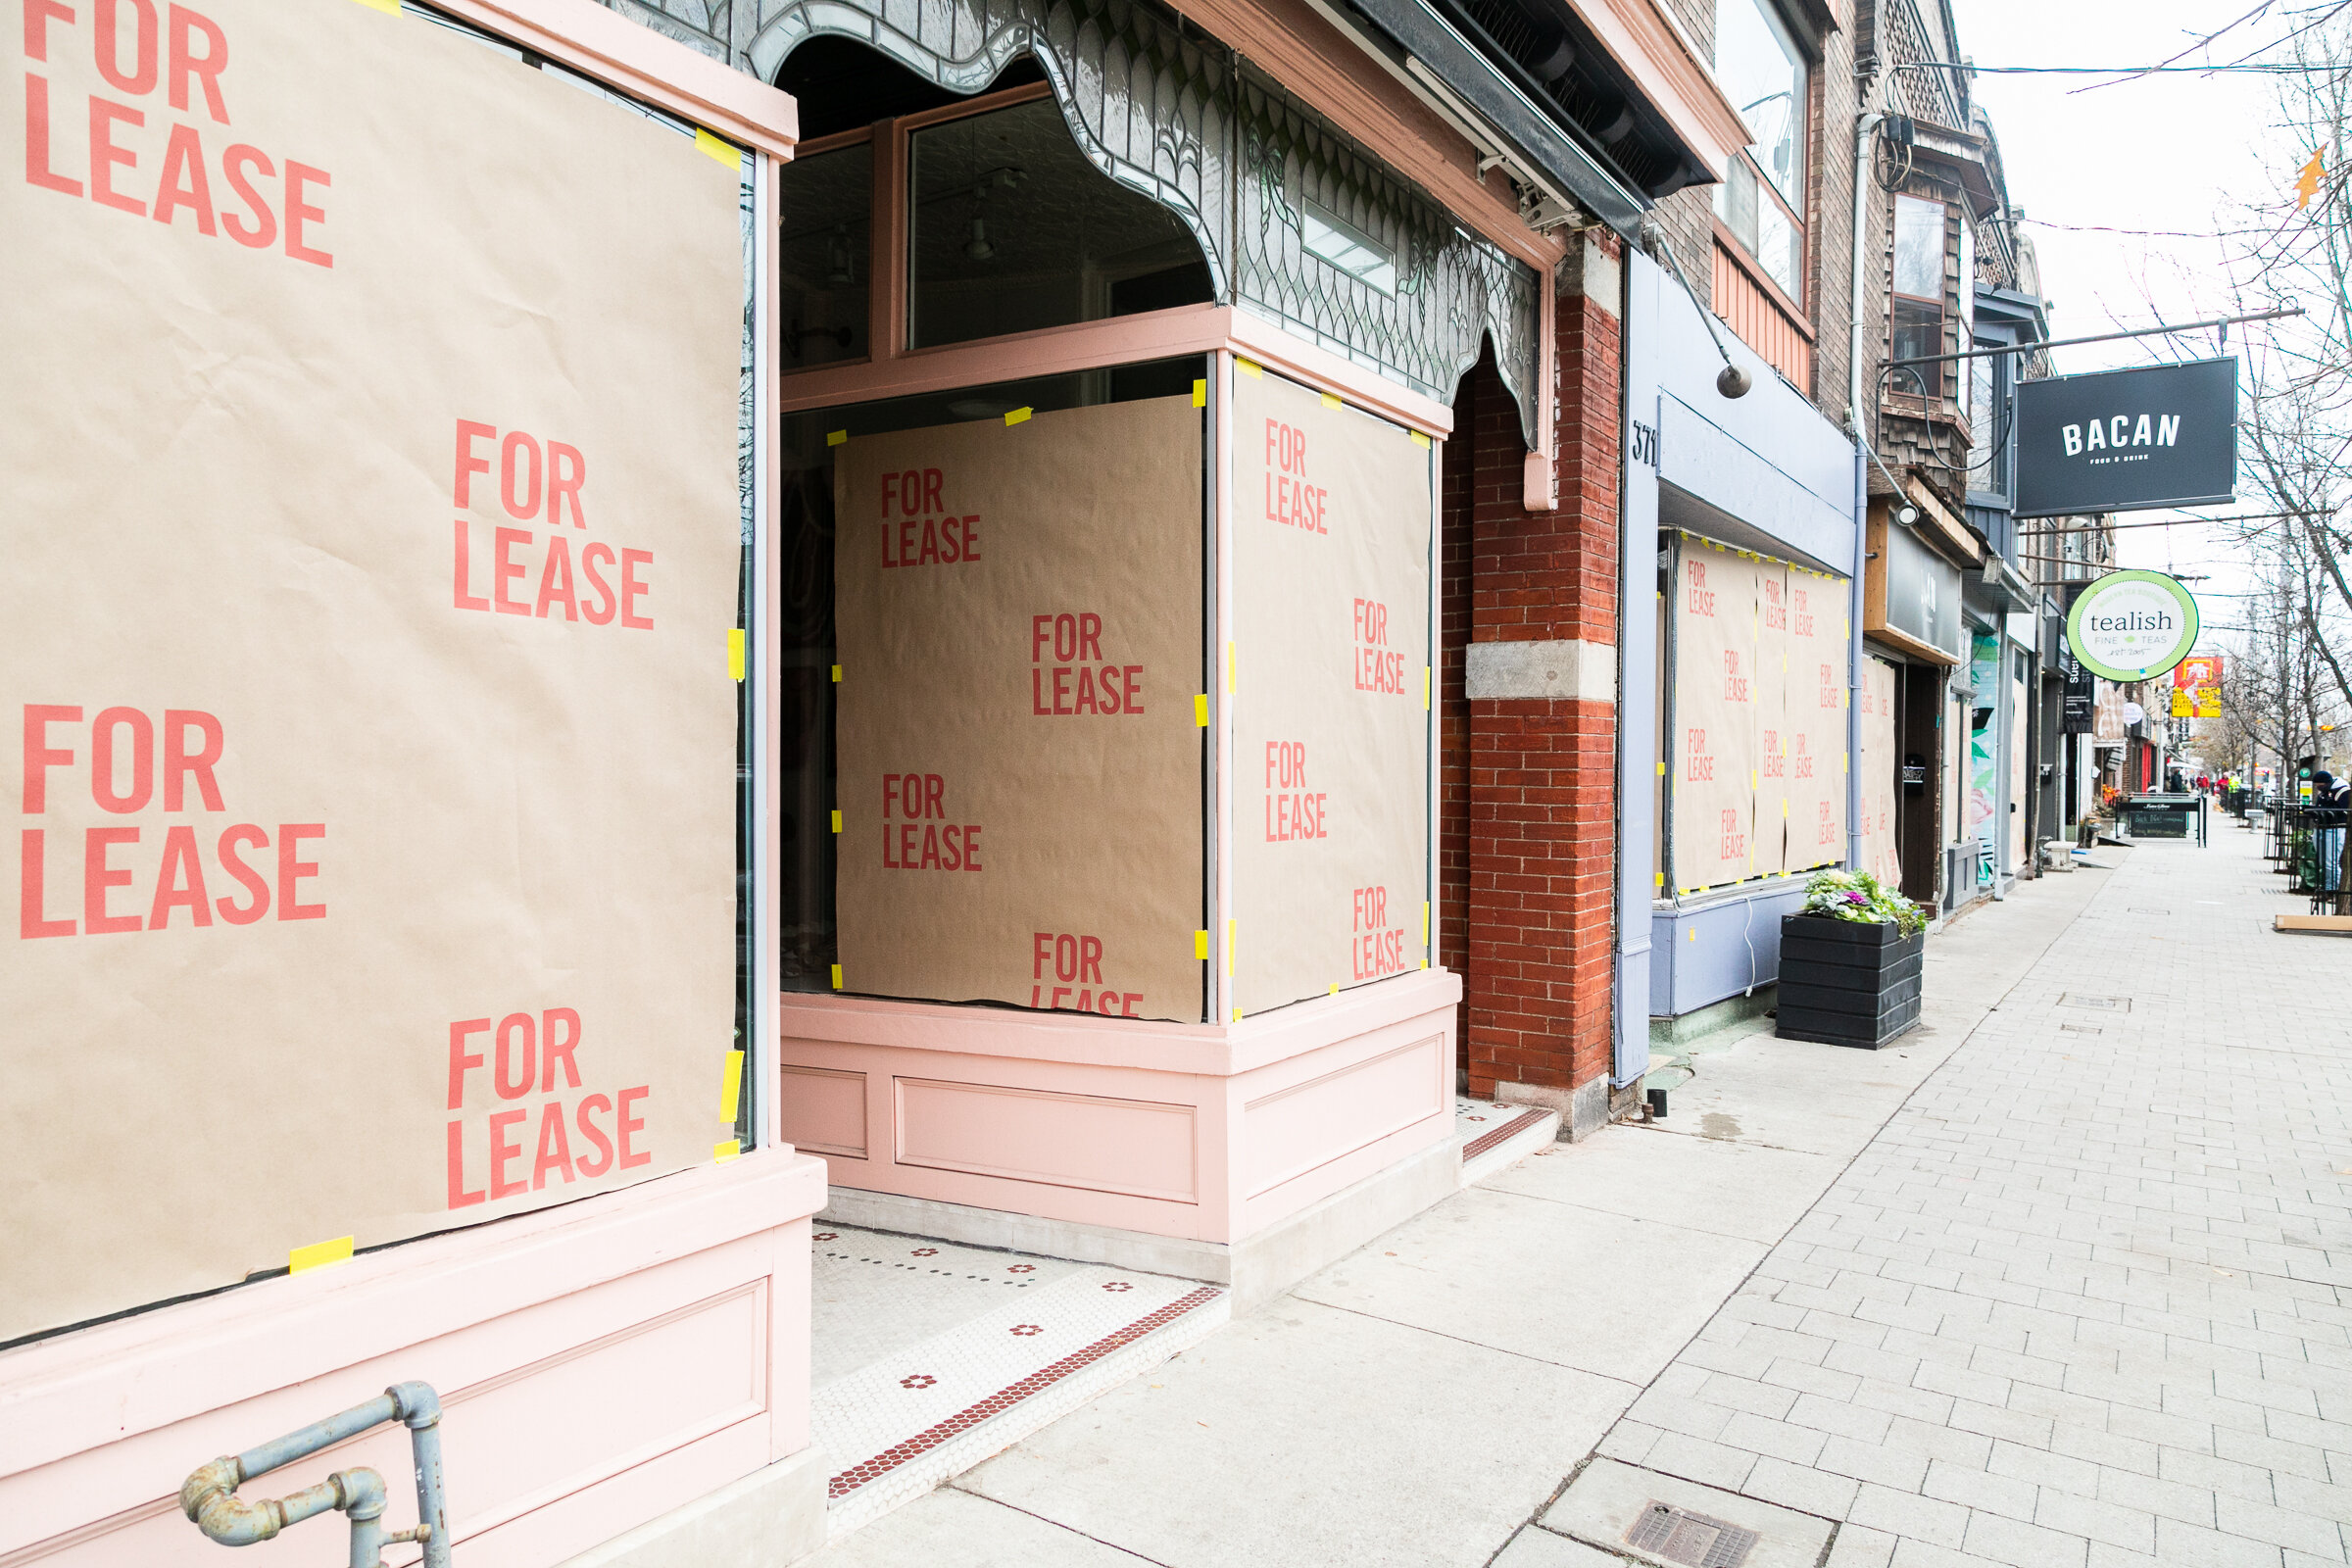 Roncesvalles Not for Lease campaign - Wild Child Grp